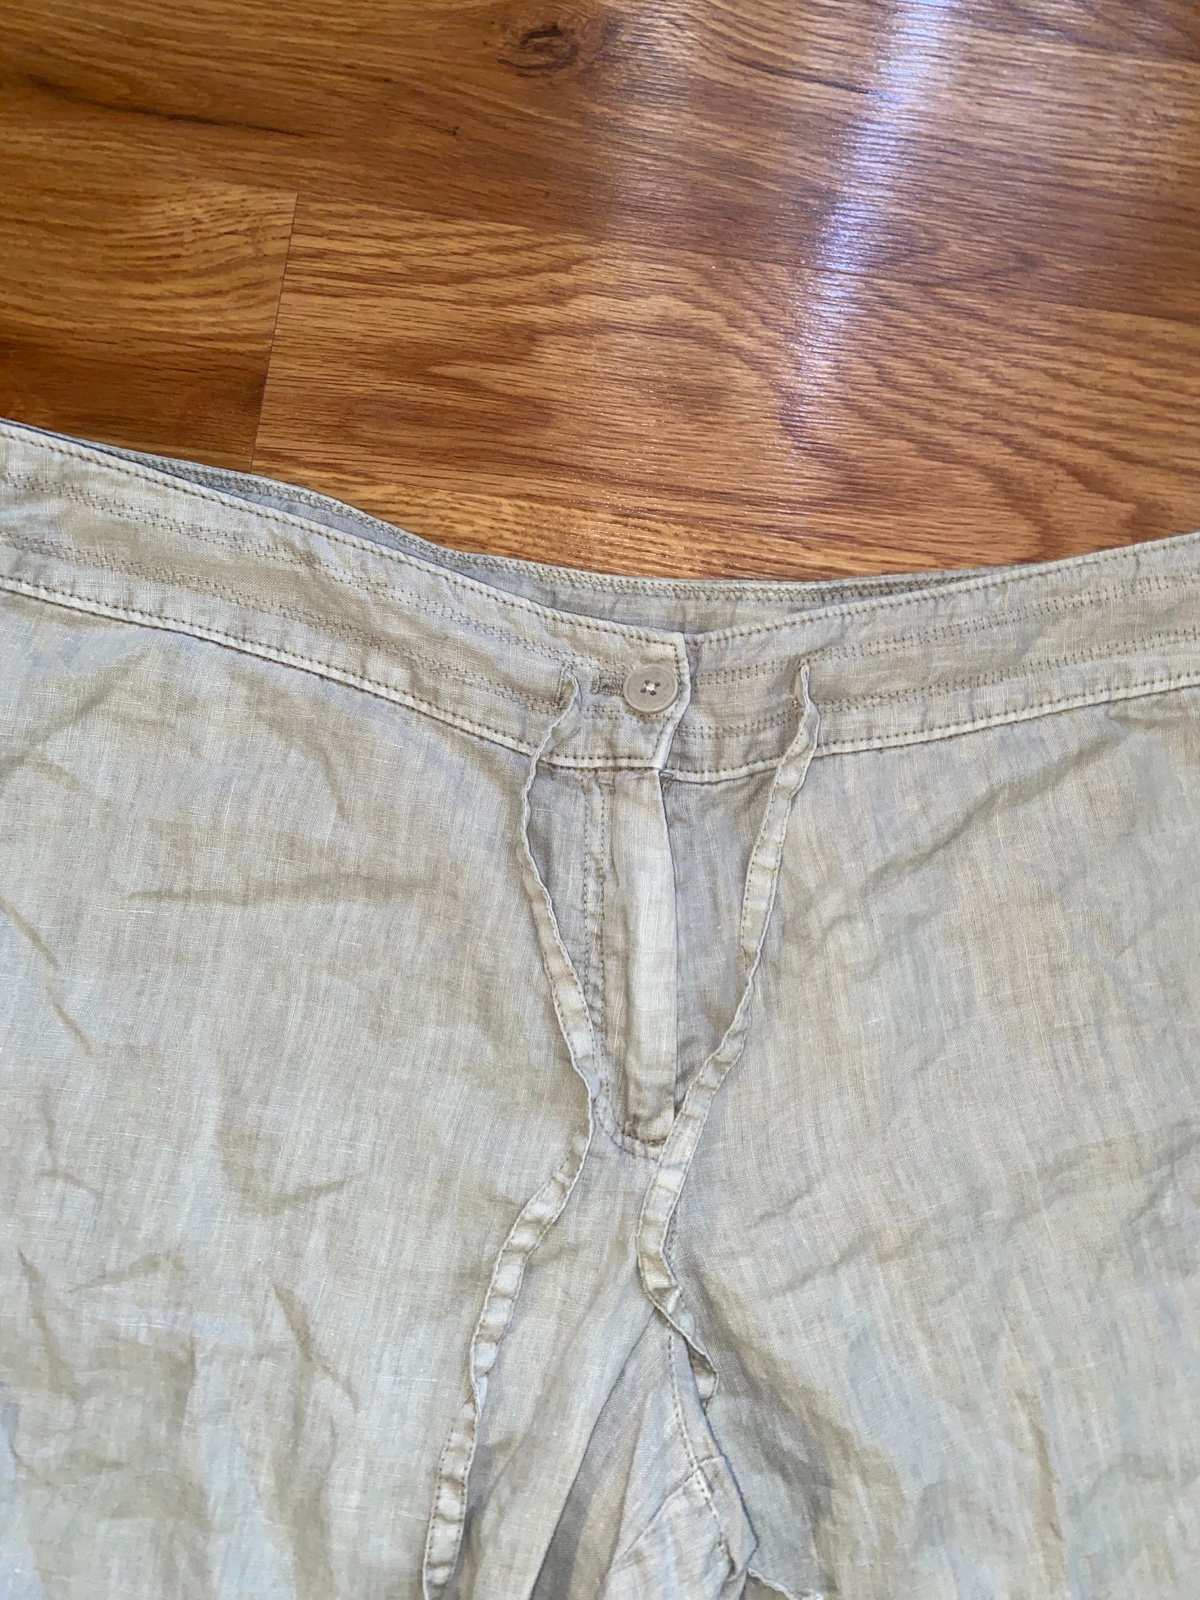 cheapest place to buy  Tommy Bahama Linen Pants kEdTdV01g Outlet Store